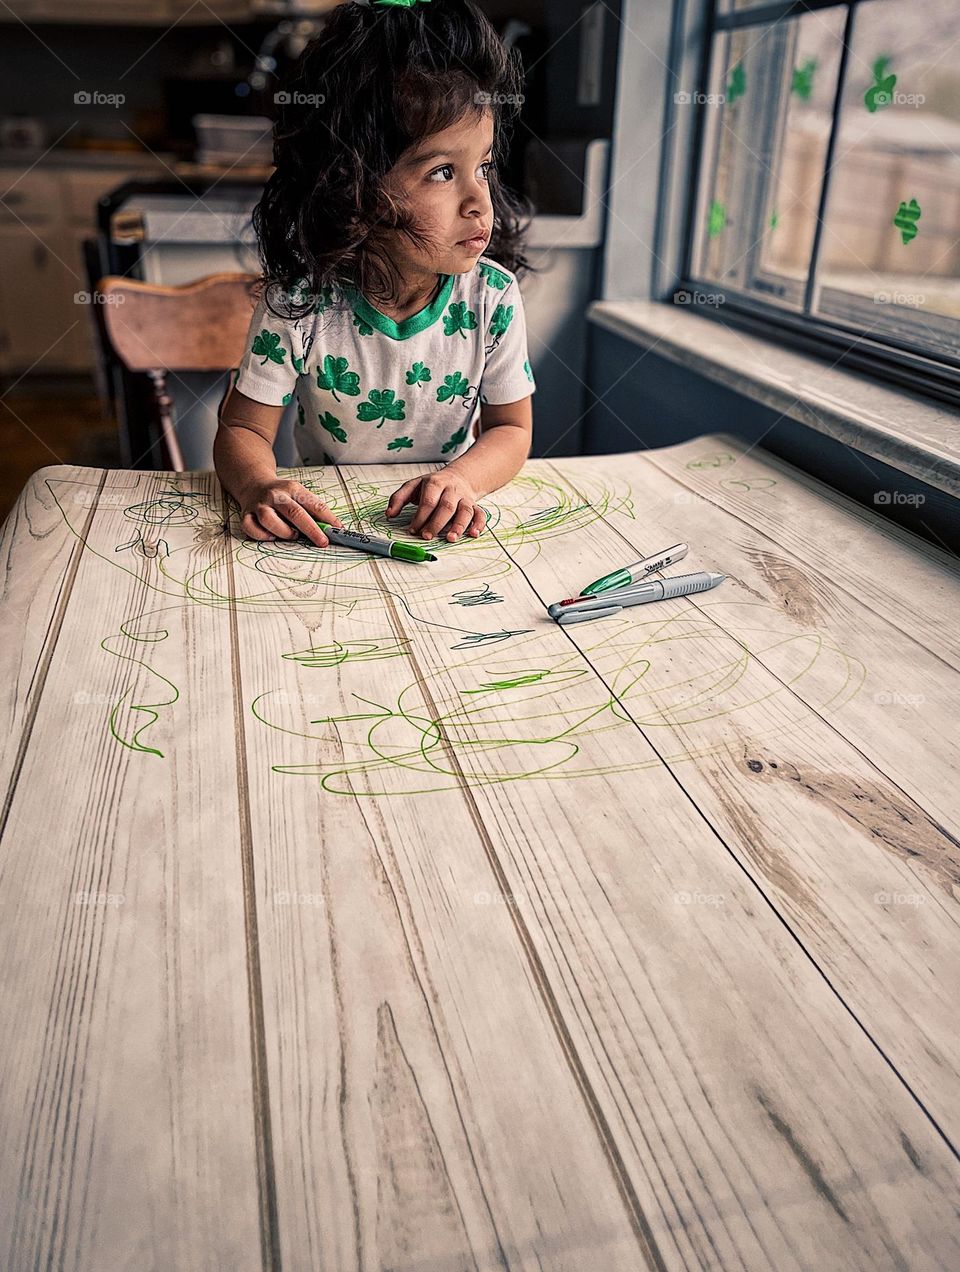 Toddler girl pondering while looking out window, toddler looking out window, little girl wishes she was outside, toddler girl making an art project by the window, toddler draws with Sharpie markers using natural light, portrait of a toddler 